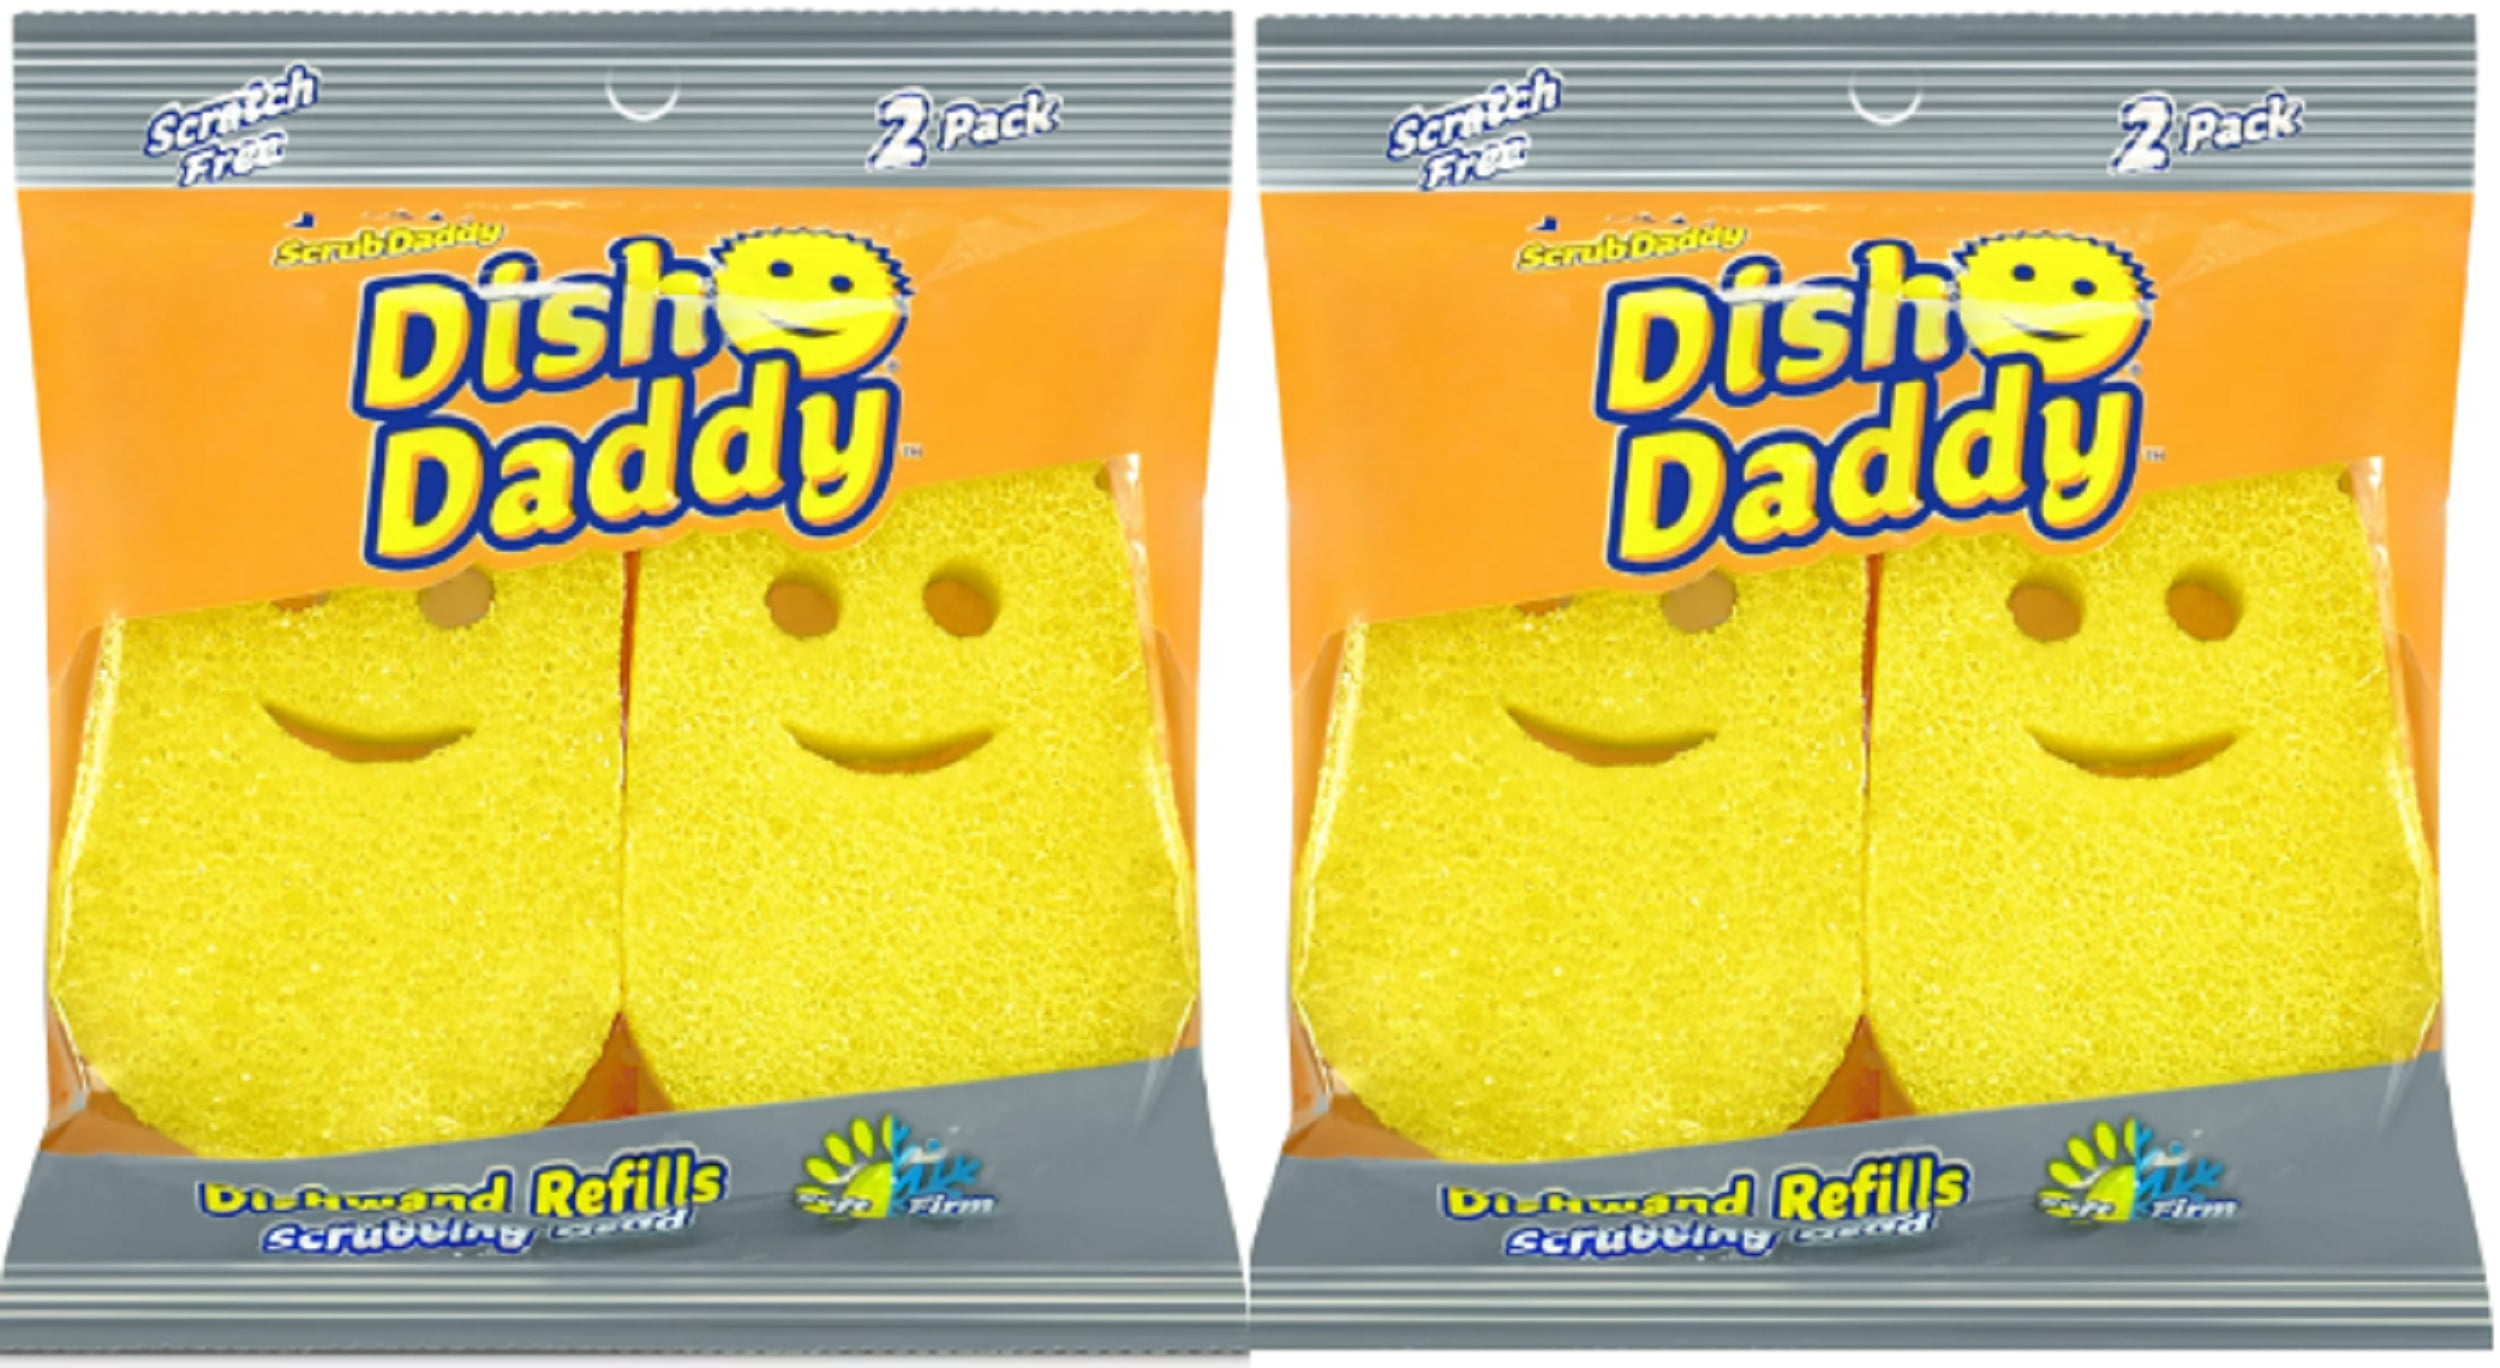  Smilyeez Heavy Duty Refill for Scrub Daddy Dish Daddy – (10  Pack) Dish Daddy Refills – Dish Daddy Sponge Replacement Head – Ideal for  Dishwashing and Kitchen Cleaning : Health & Household